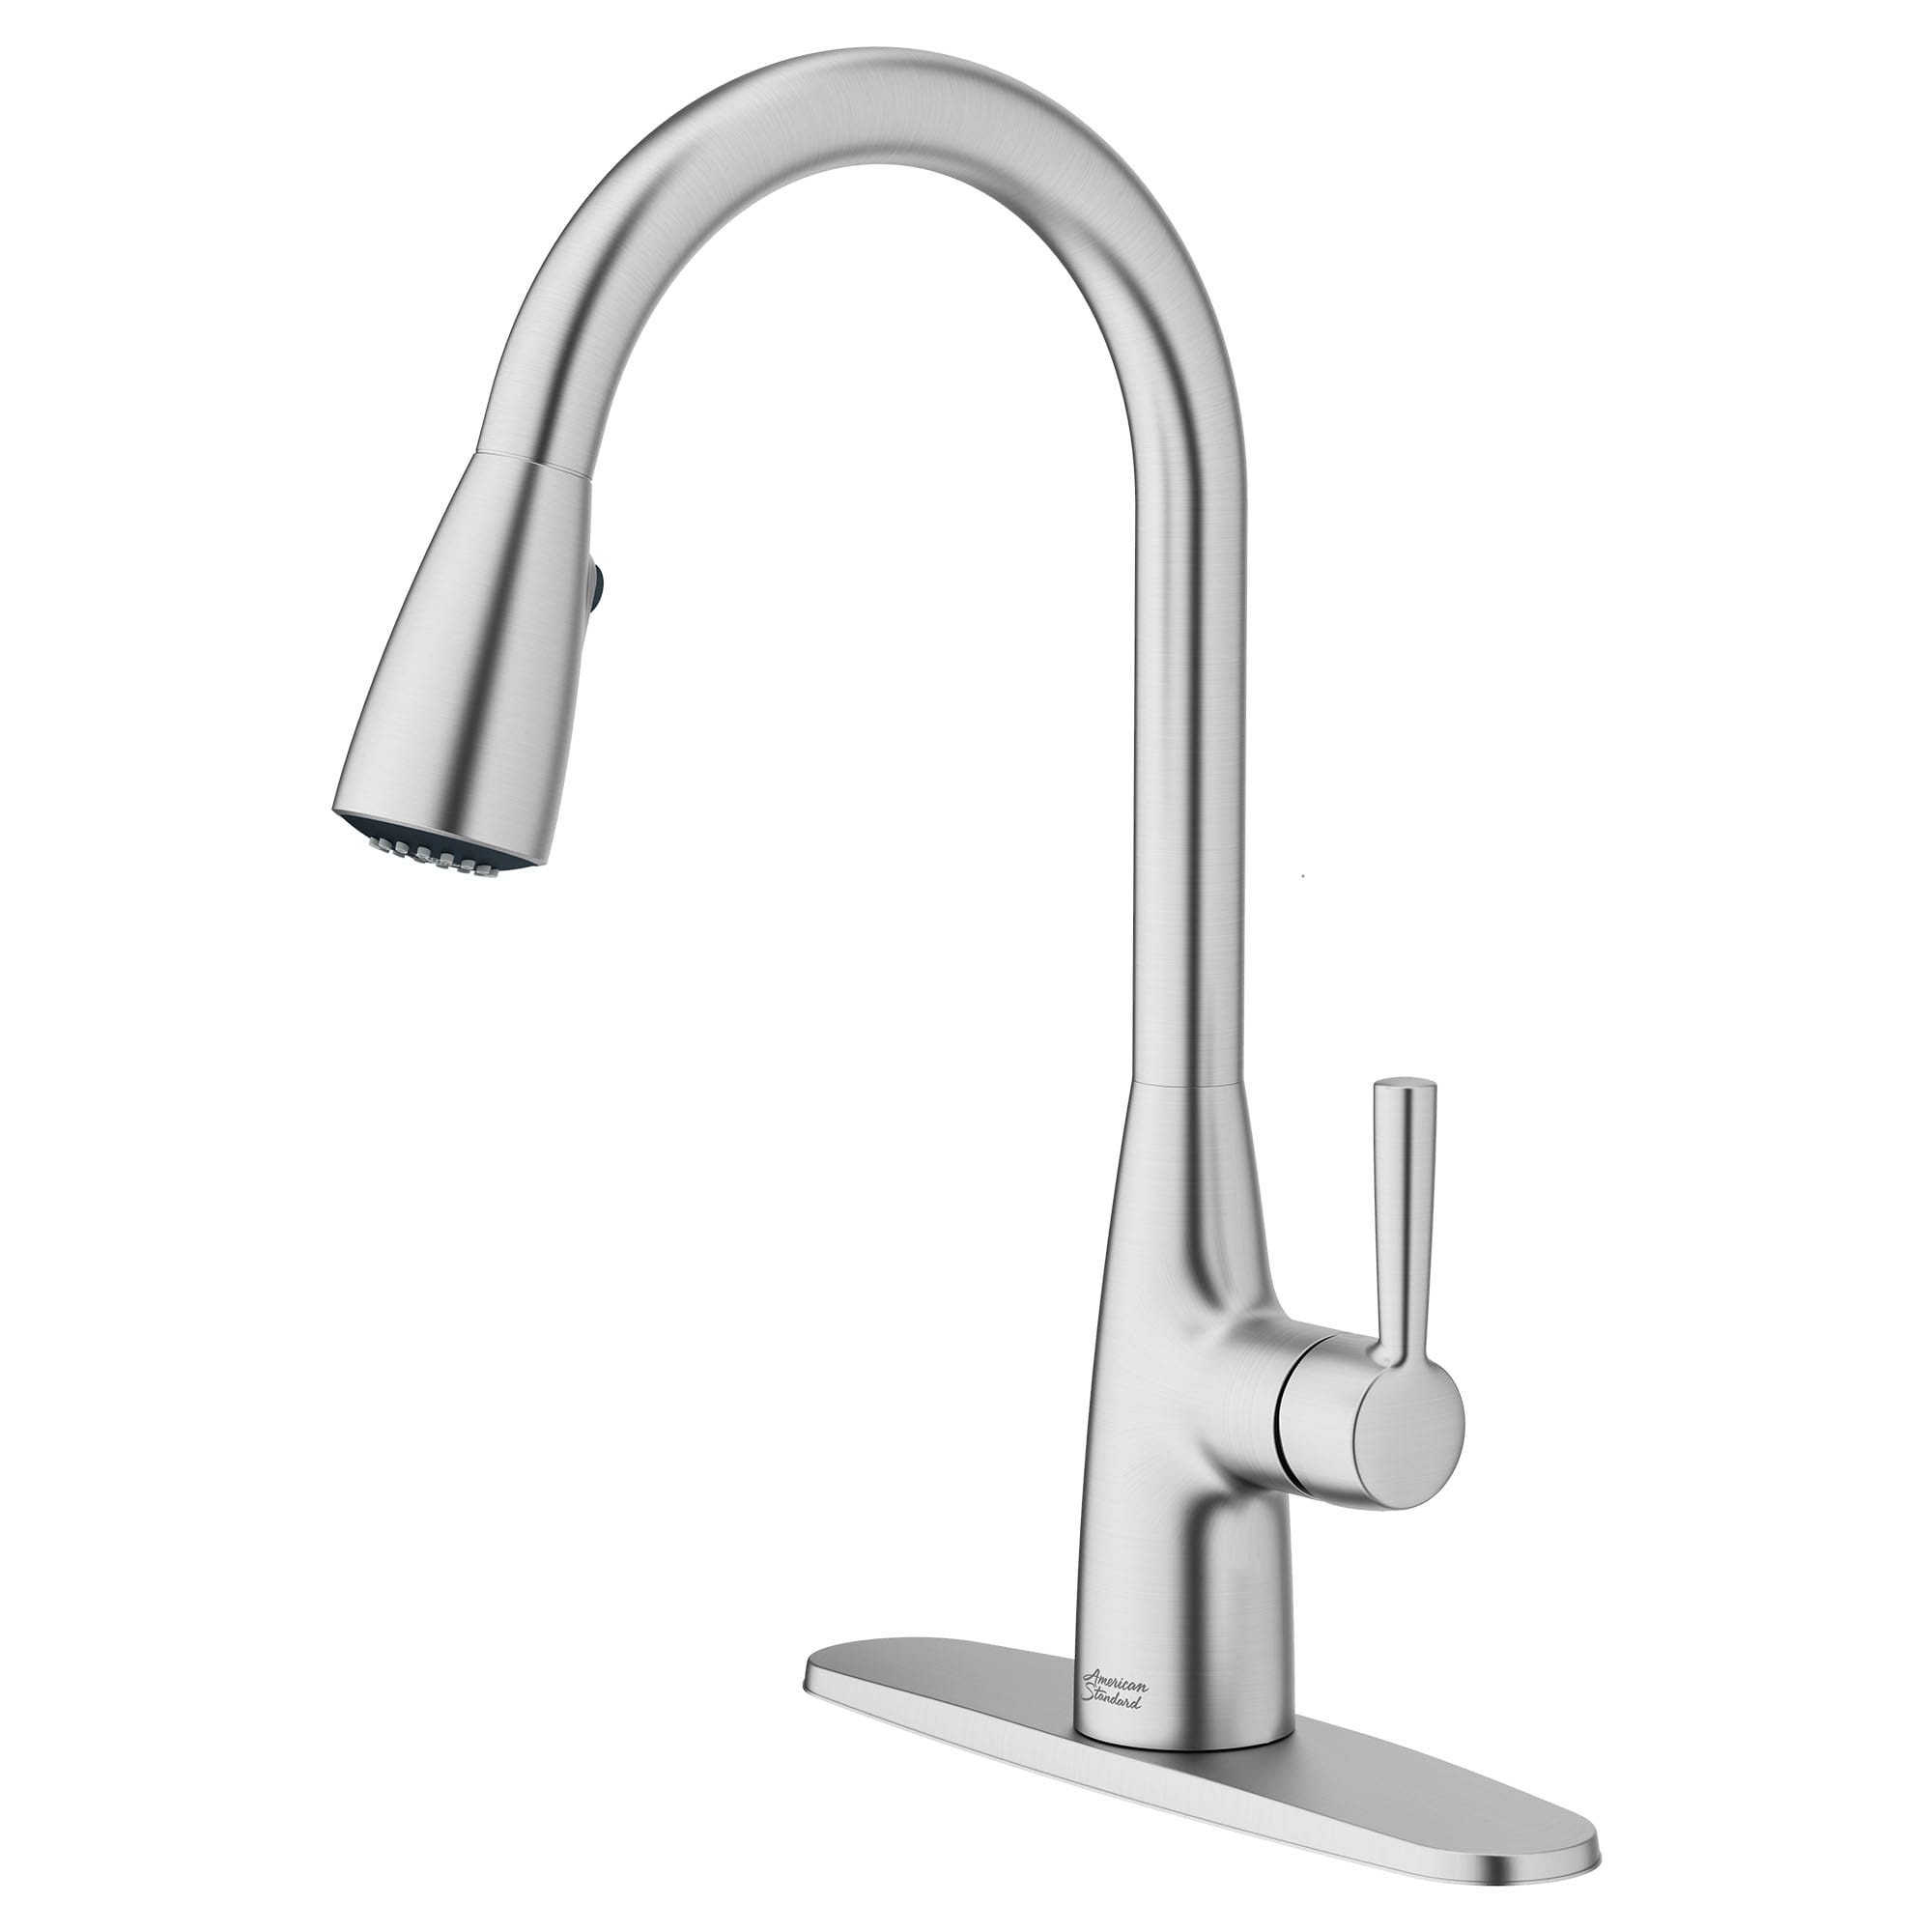 Fairbury® Single-Handle Pull-Down Dual Spray Kitchen Faucet 1.8 gpm/6.8 L/min With Lever Handle